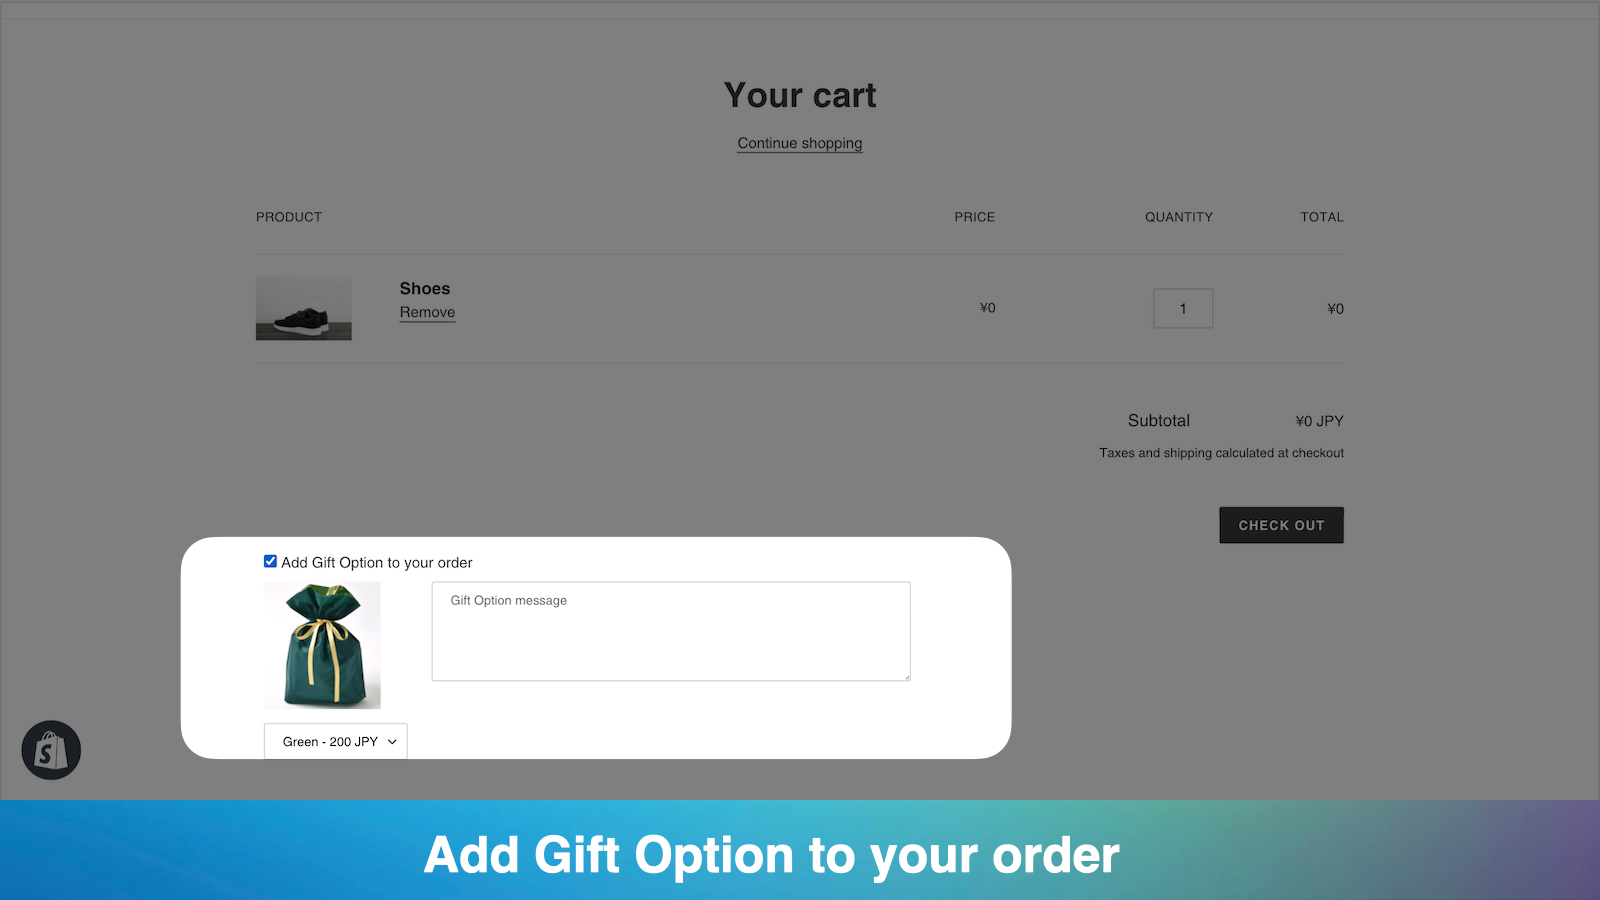 Add Gift Option to your order